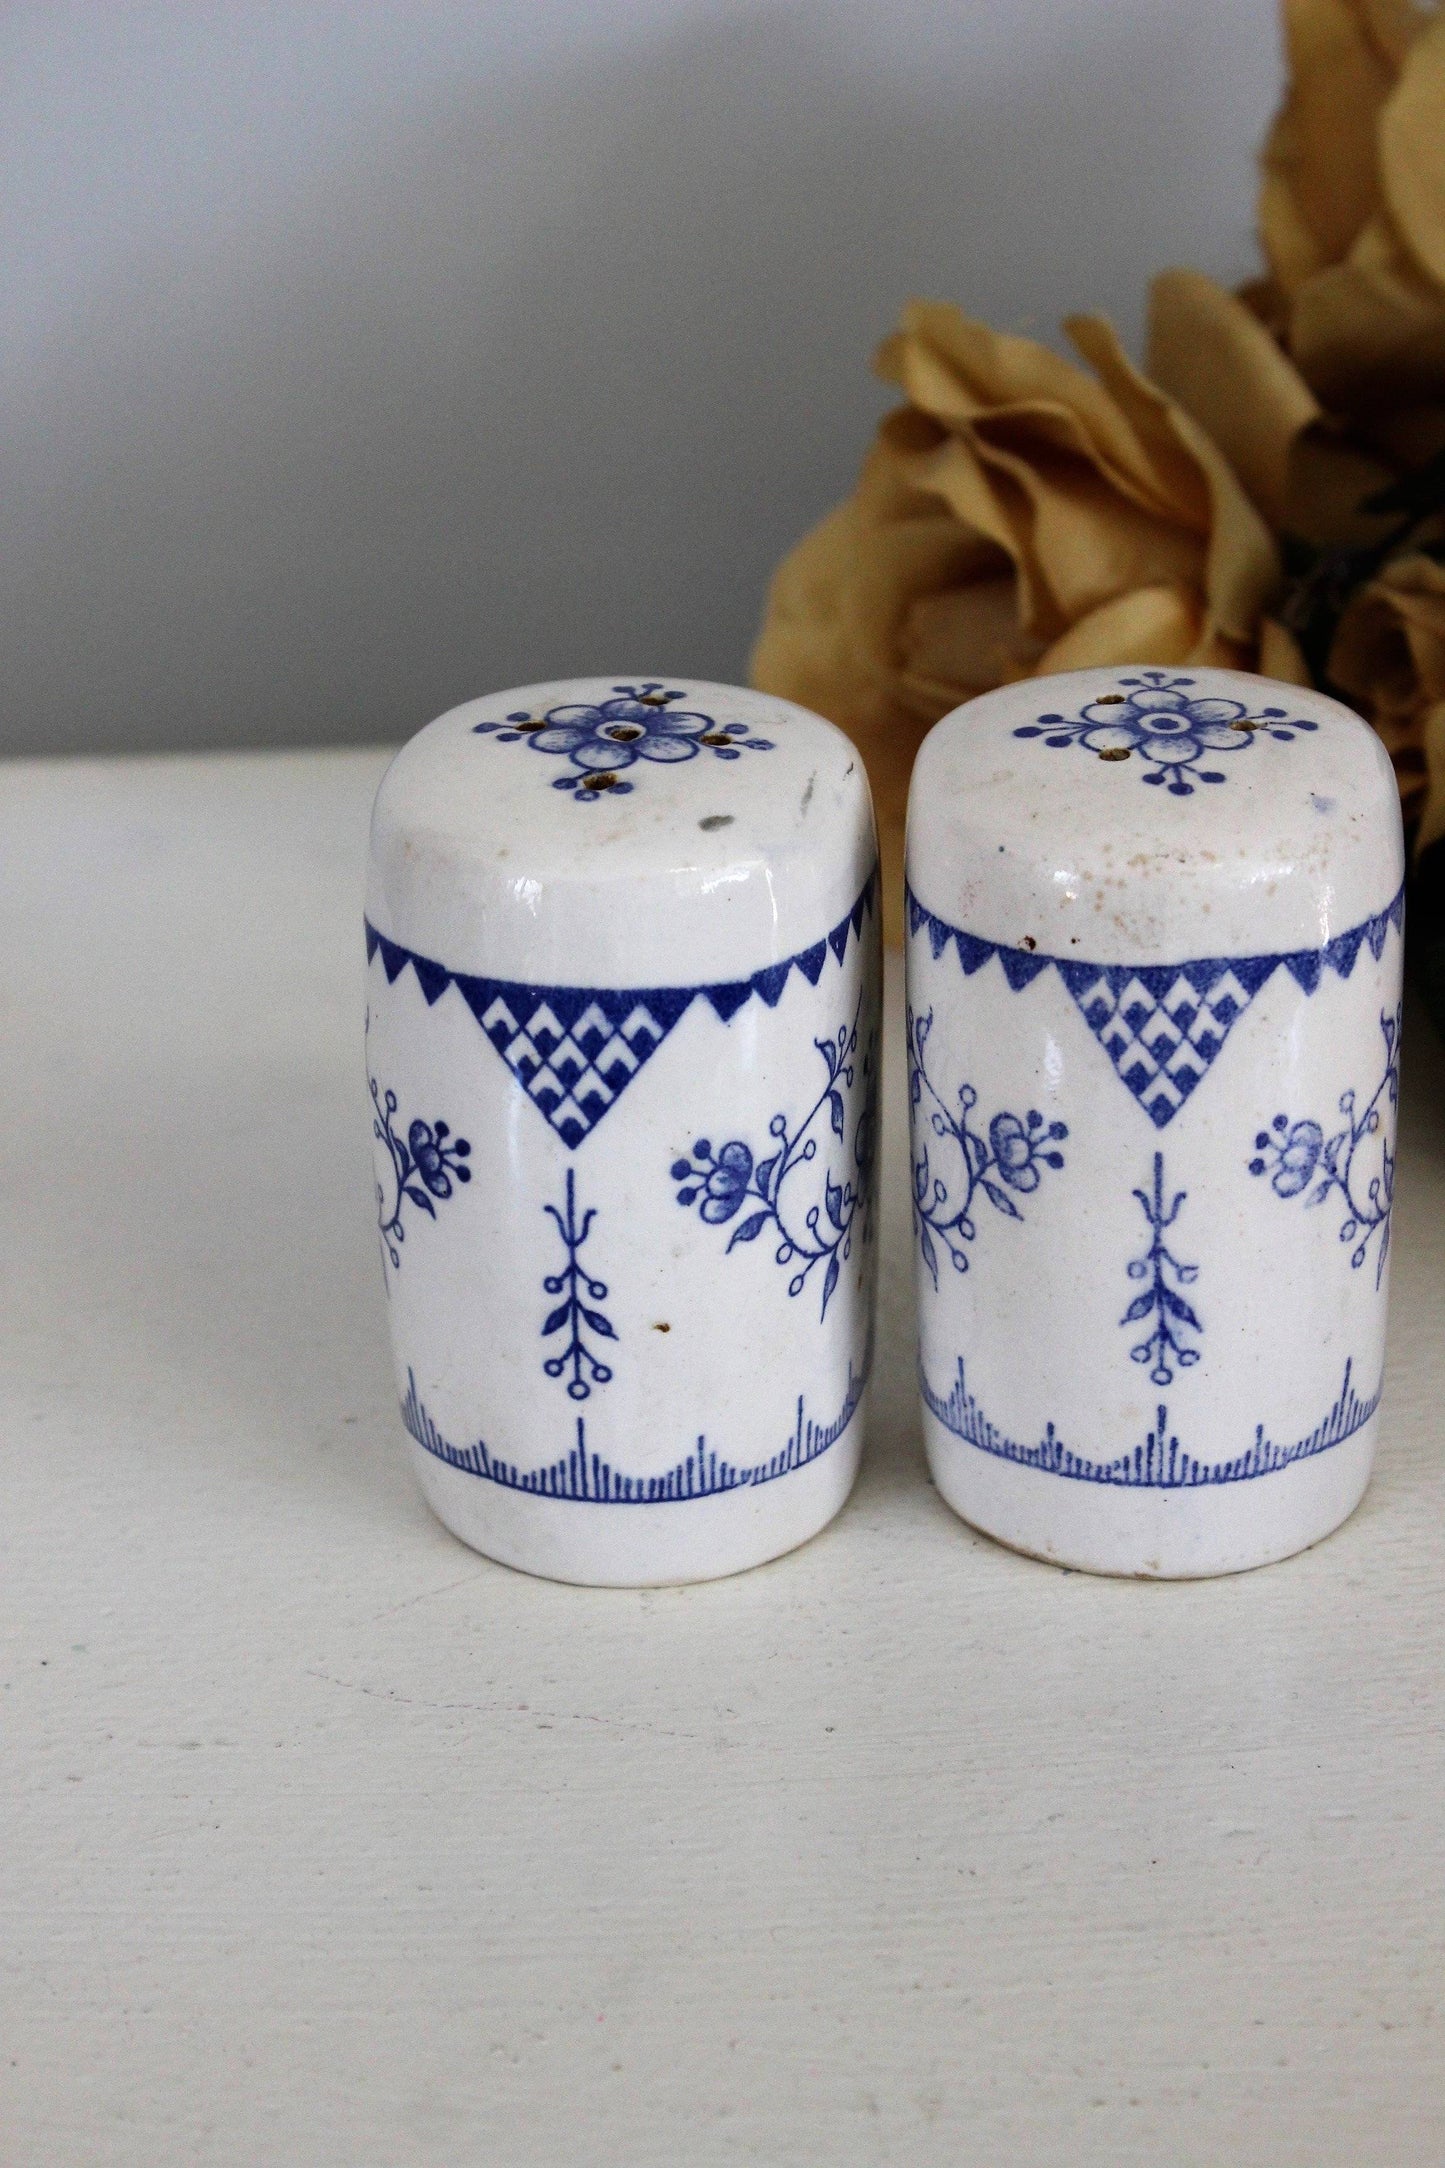 Vintage Blue and White Japanese Salt and Pepper Shaker-Mint Chips Vintage Home Goods-Blue and Whte,Ceramic Floral,Collectible,Delft,Japanese,Japanese Ceramic Delft,Made in Japan,Nippon Salt and Pepper,Pepper Shaker,Salt and pepper Shaker Set,Salt Shaker,Serving Ware,Vintage,Vintage Ceramic,Vintage China,Vintage Kitchenware,Vintage S and P Set,Vintage Tableware